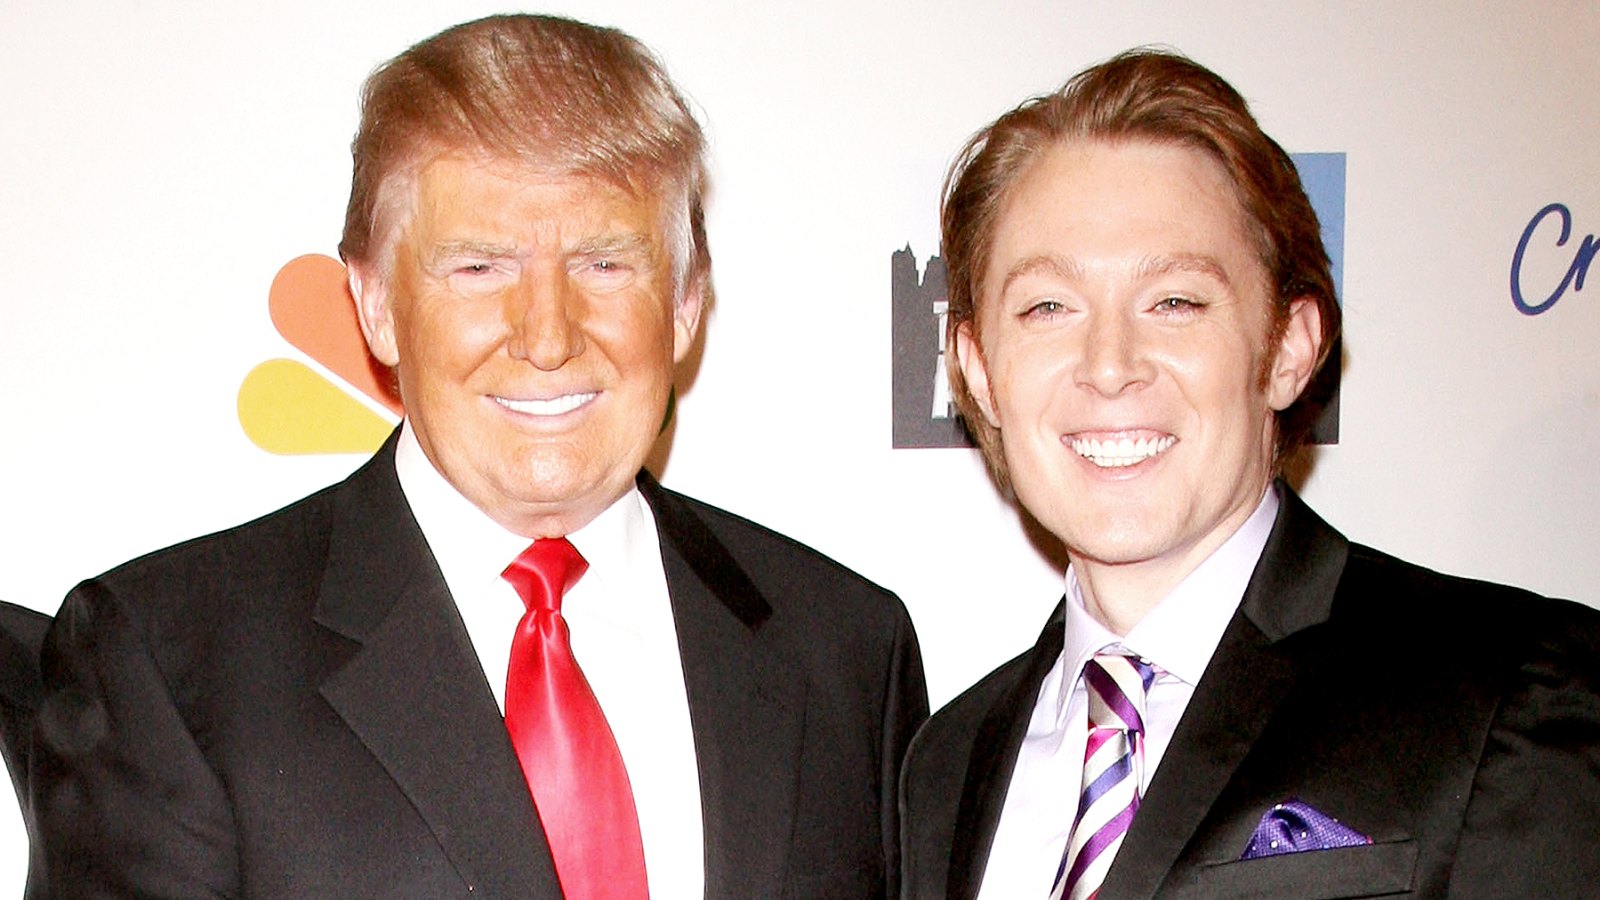 Donald Trump and Clay Aiken attend the "Celebrity Apprentice" Live Finale at American Museum of Natural History on May 20, 2012 in New York City.